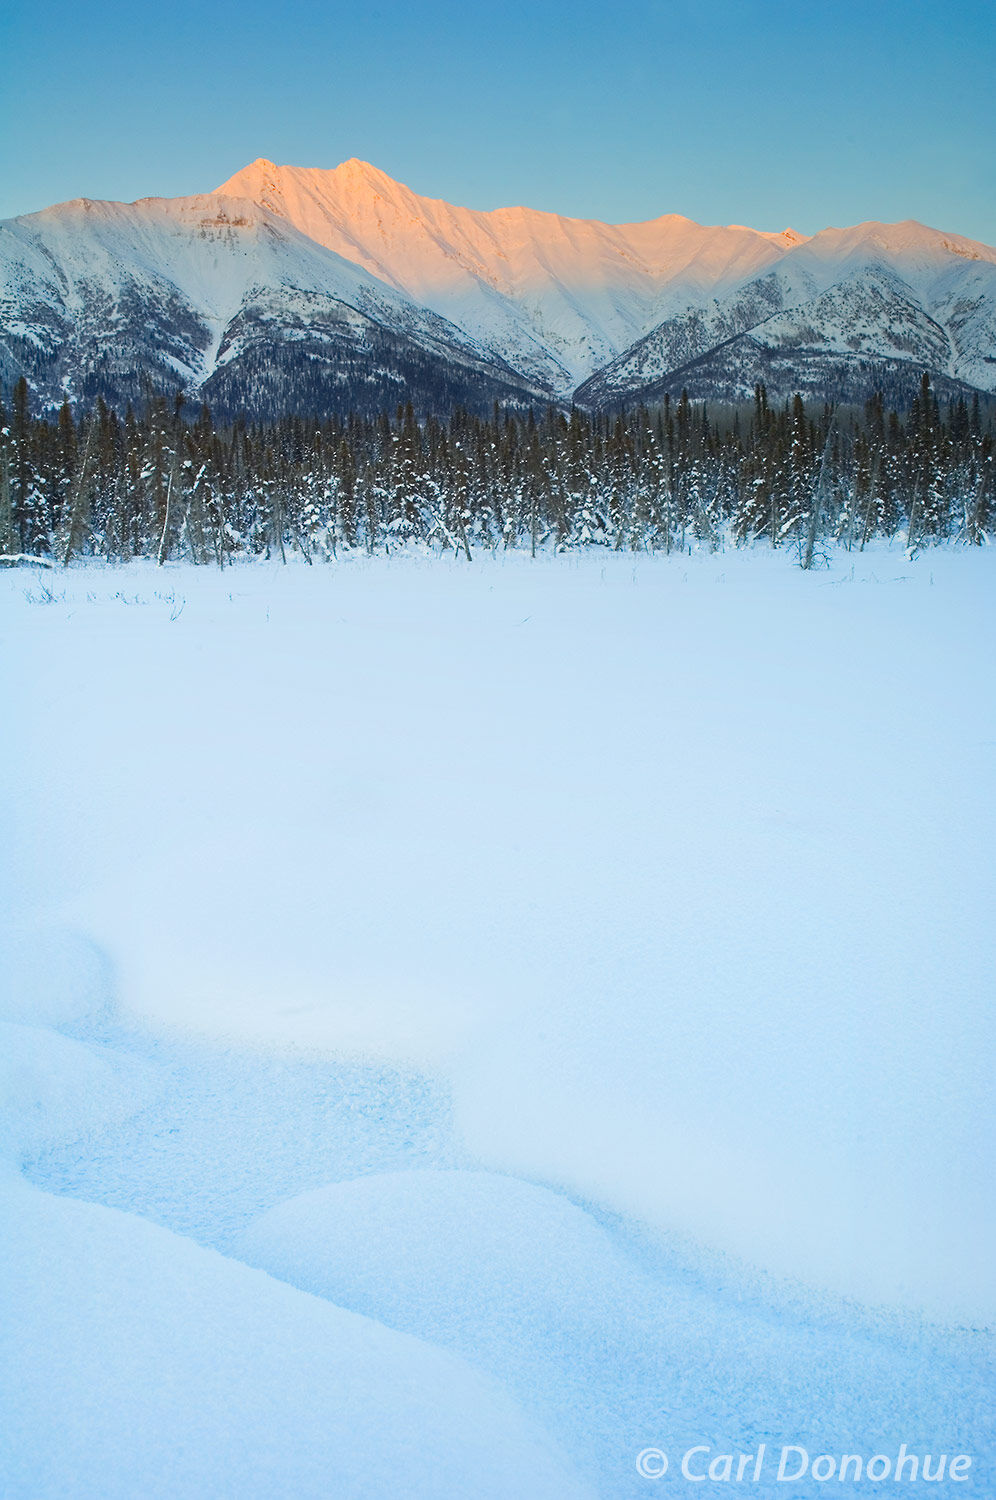 Fireweed Mountain, winter, sunset, alpenglow, snow-covered pond, boreal forest, Wrangell-St. Elias National Park, Alaska.